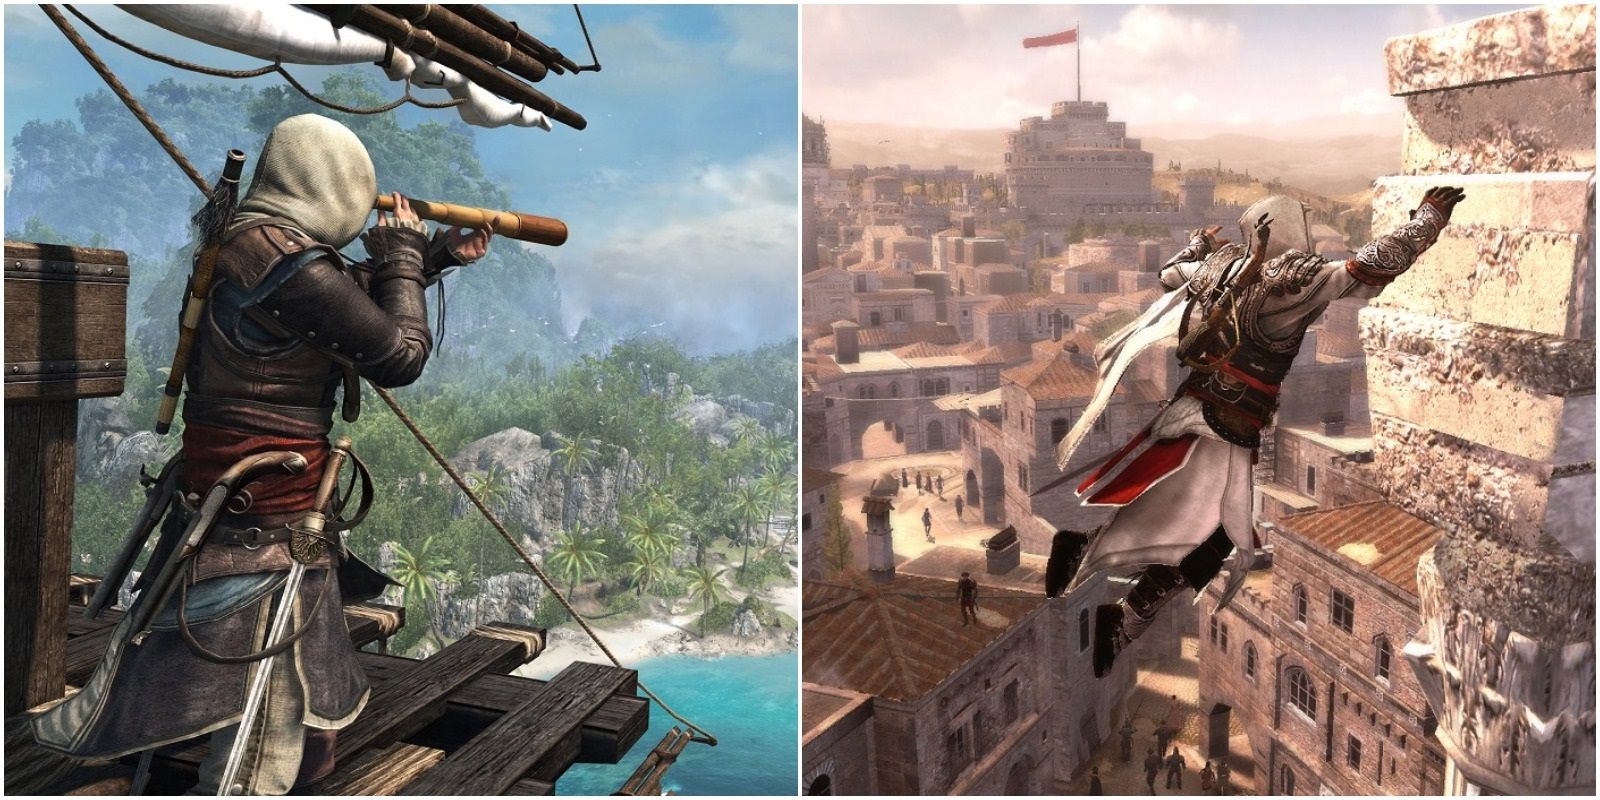 Top 10 Assassin's Creed Games, From Ezio to Eivor and several games and  assassins in between, we rank the top 10 Assassin's Creed games., By IGN